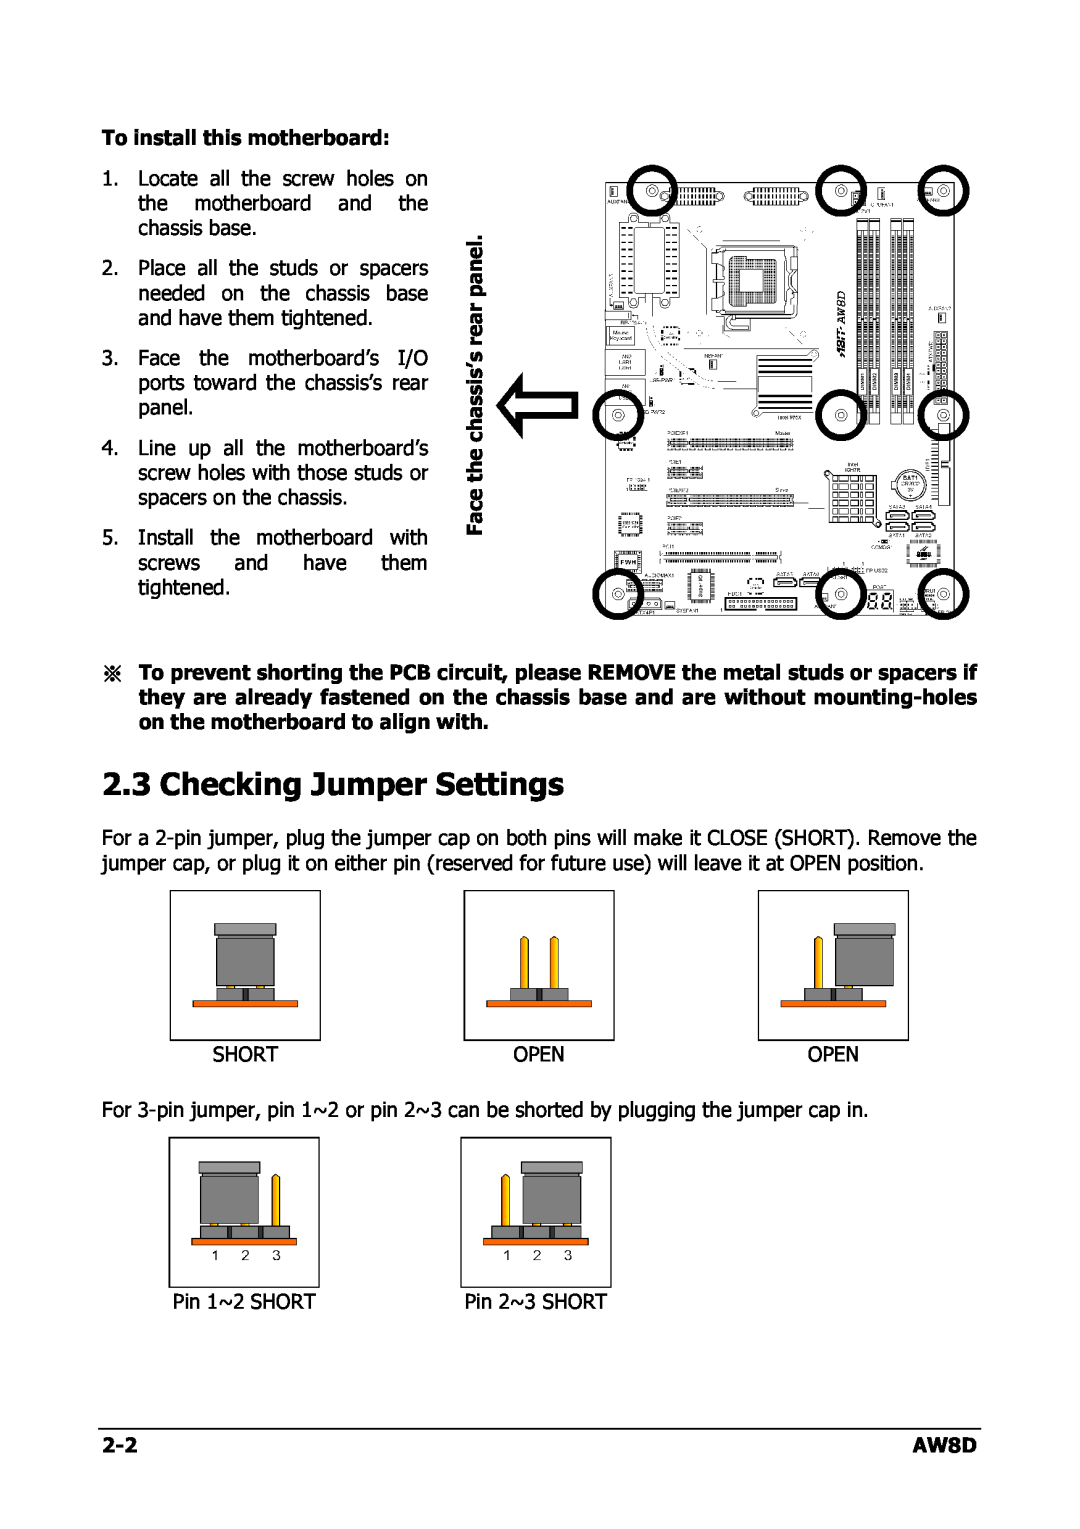 Intel AW8D user manual Checking Jumper Settings, Open 